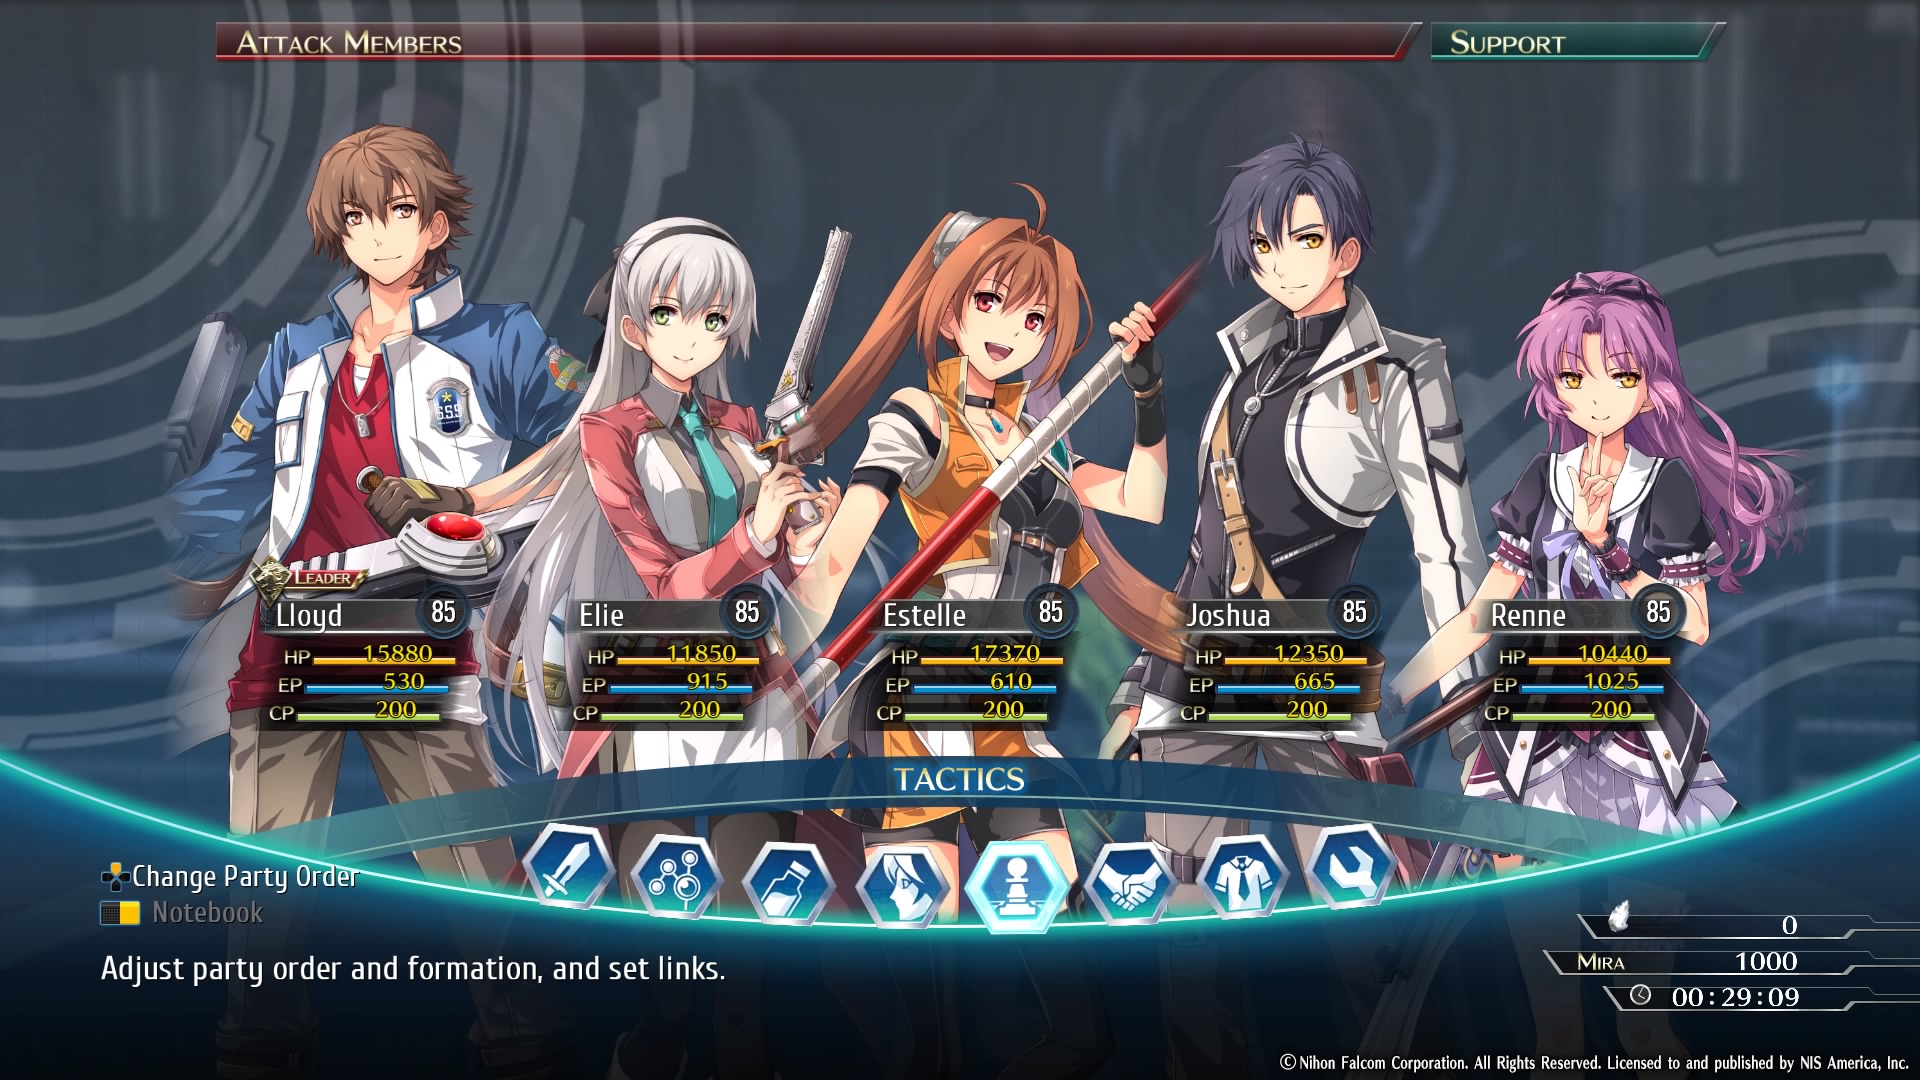 3rd-strike.com | The Legend of Heroes: Trails of Cold Steel IV Review